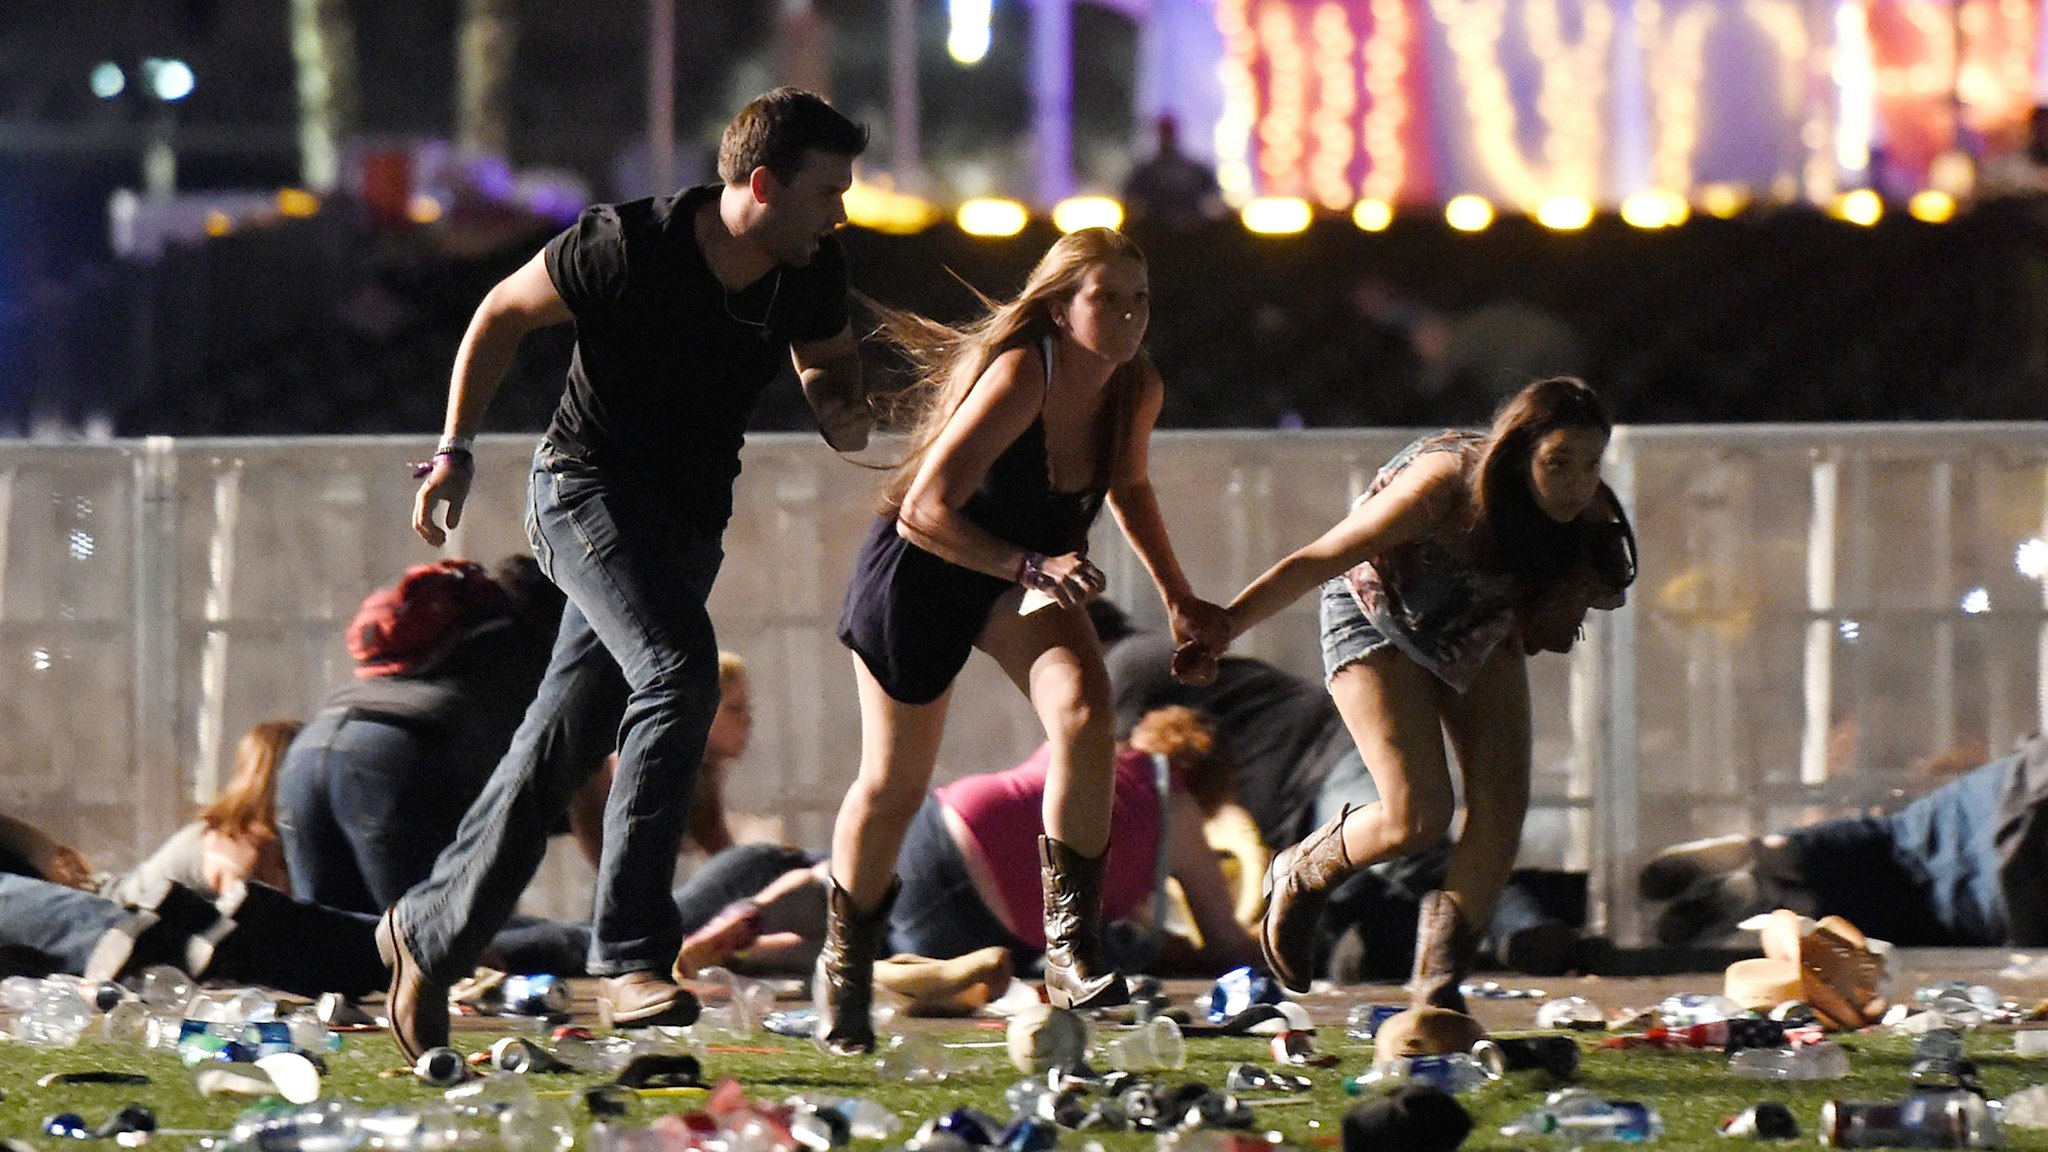 LAS VEGAS, NV - OCTOBER 01: People run from the Route 91 Harvest country music festival after apparent gun fire was hear on October 1, 2017 in Las Vegas, Nevada. A gunman has opened fire on a music festival in Las Vegas, leaving at least 20 people dead and more than 100 injured. Police have confirmed that one suspect has been shot. The investigation is ongoing.